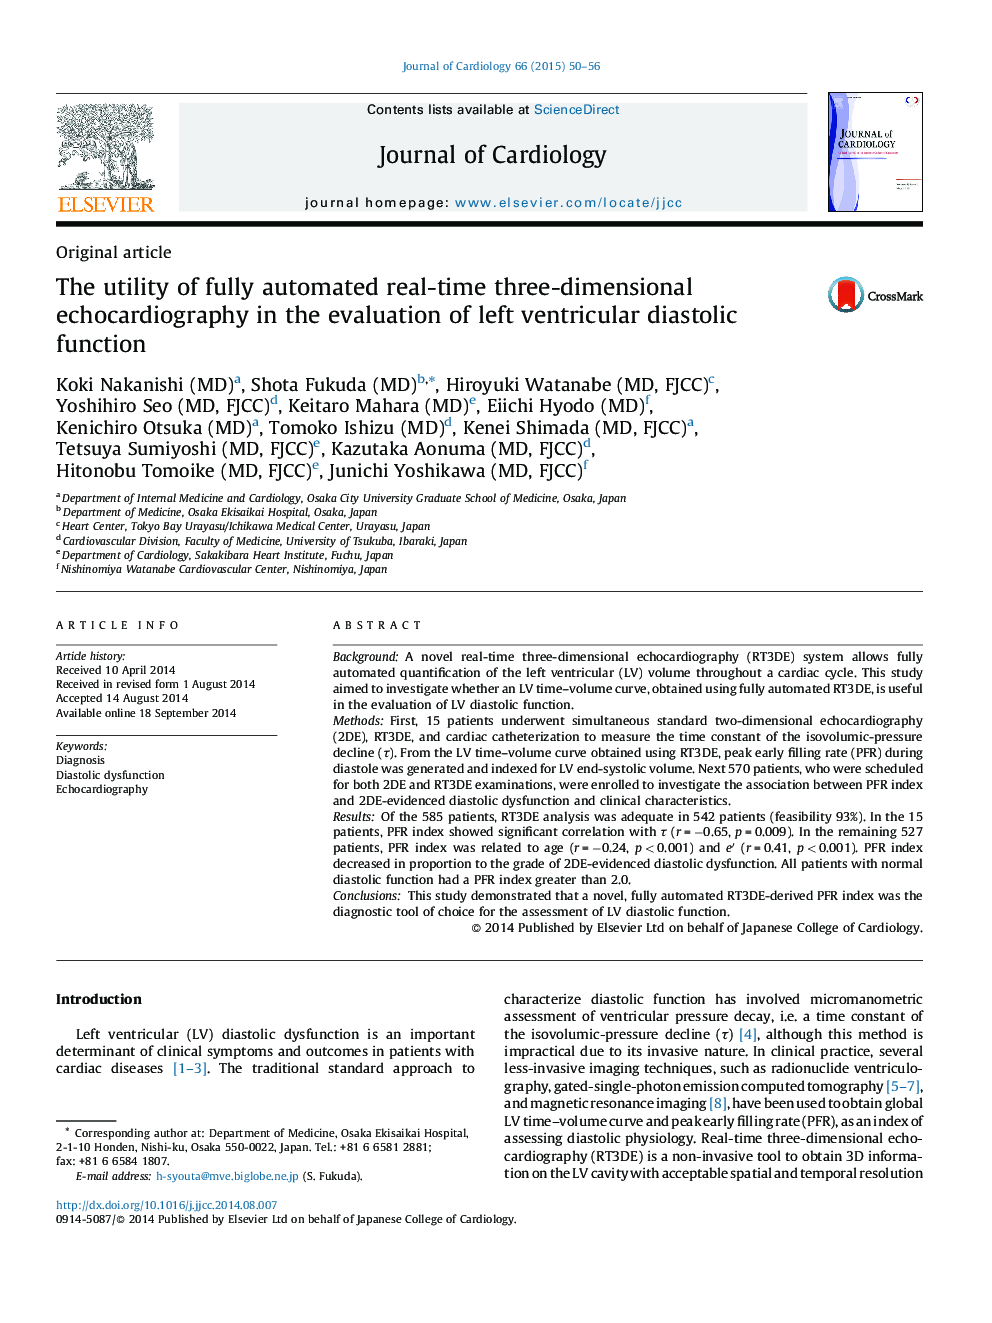 The utility of fully automated real-time three-dimensional echocardiography in the evaluation of left ventricular diastolic function